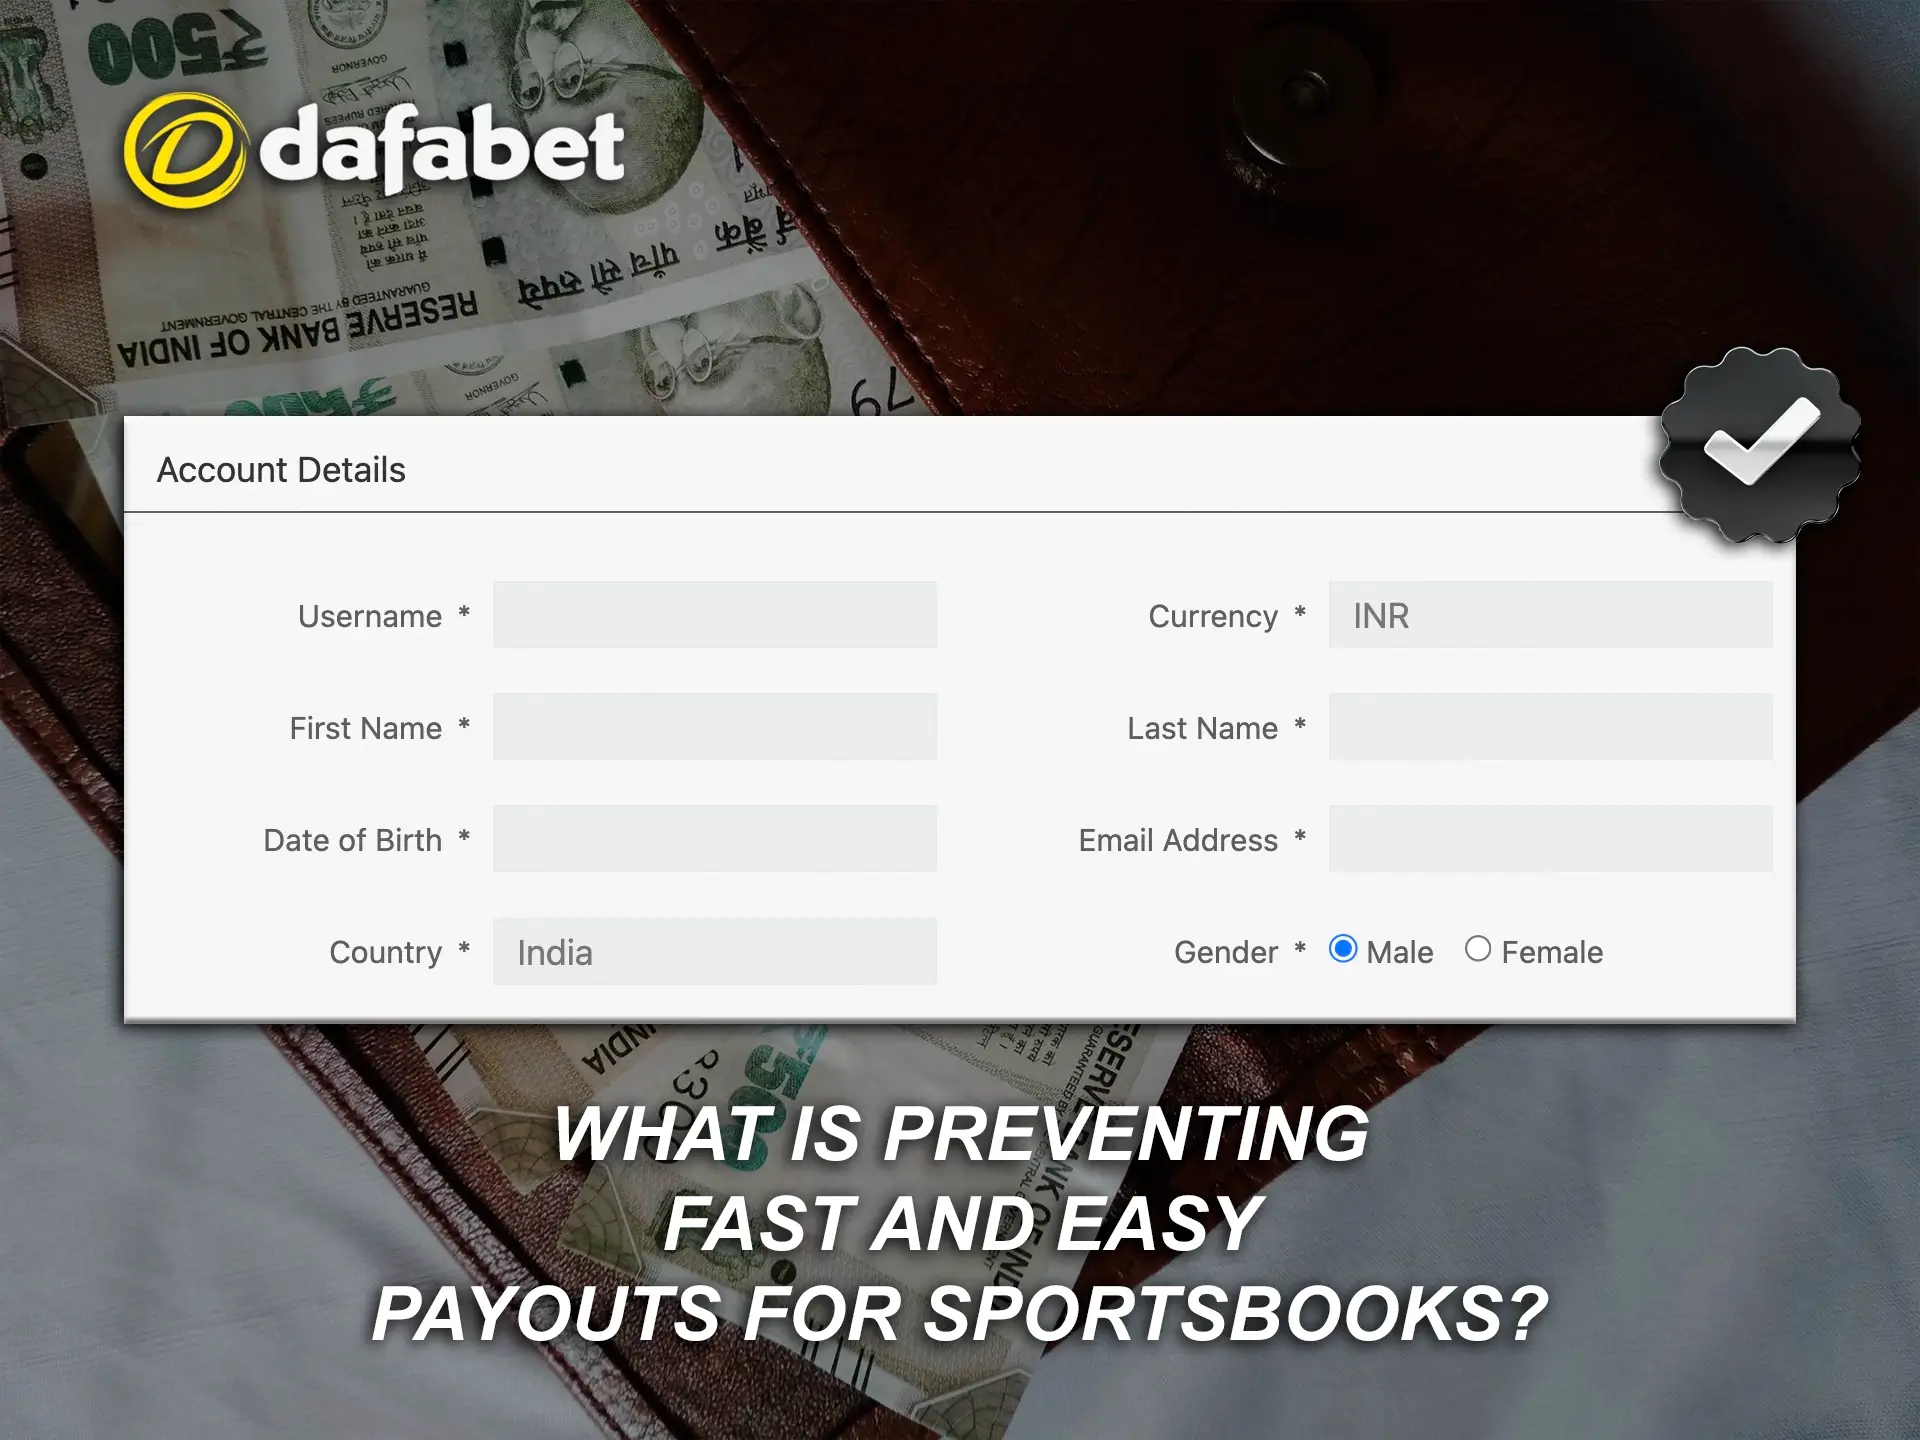 Be sure to fill in your details in your Dafabet Casino profile to get full access to the withdrawal feature.